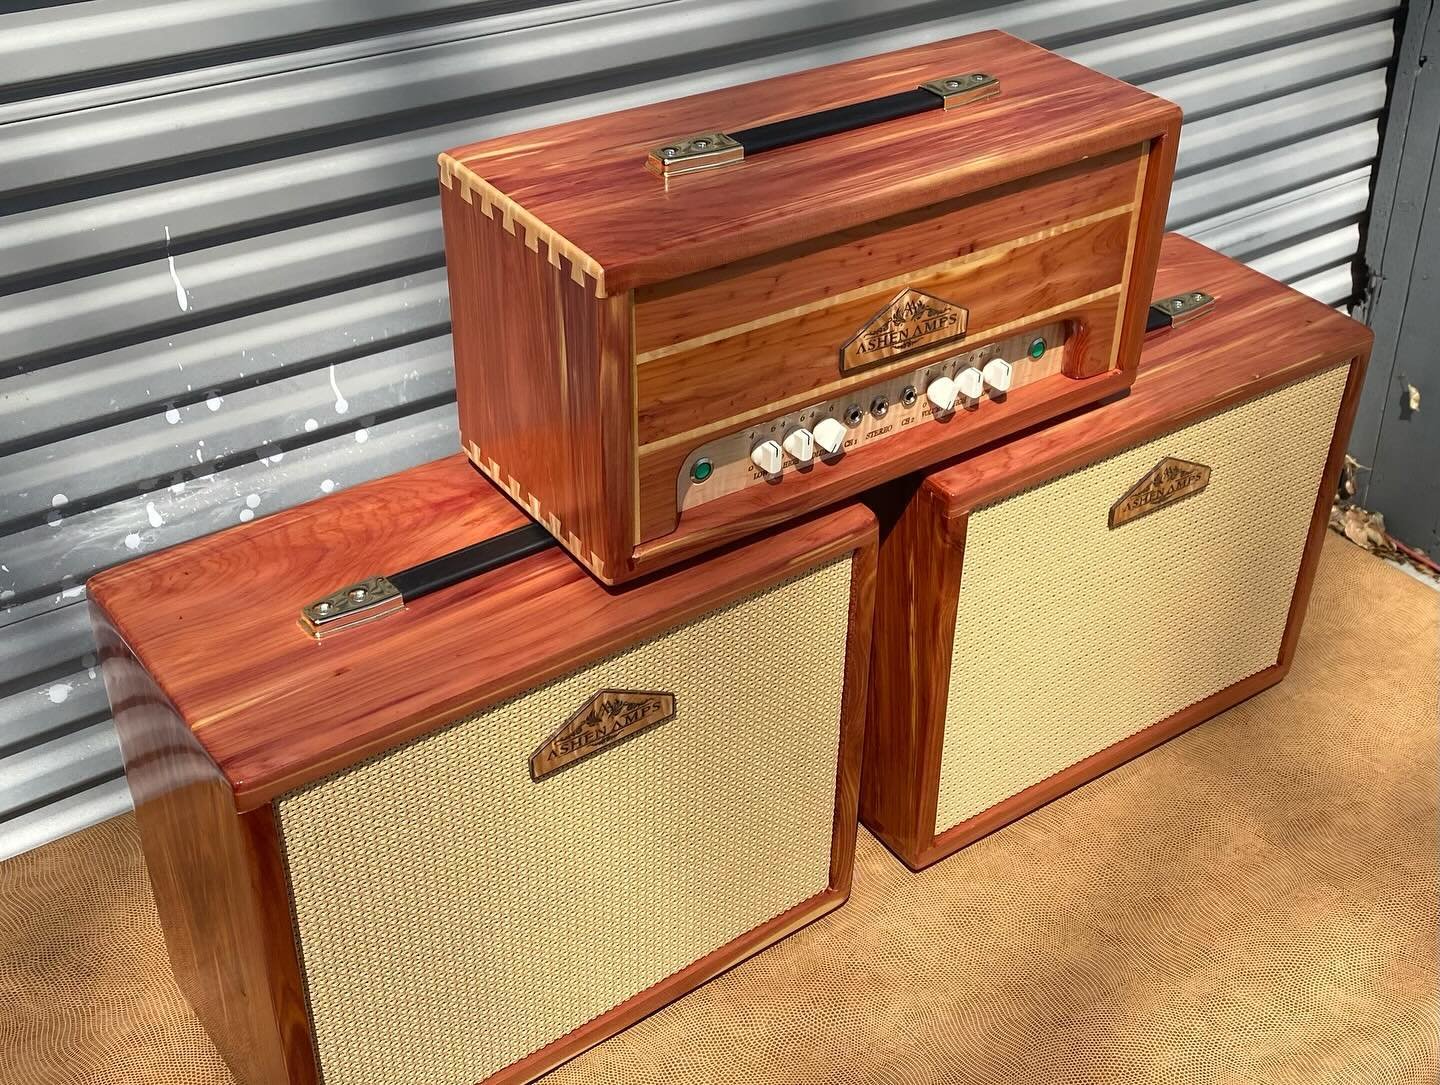 Introducing the latest addition to our collection: the meticulously crafted to order @ashen_amps stereo tube guitar amplifier set! 🎸🔊 This custom-built beauty is a perfect blend of artistry and functionality, delivering unparalleled real stereo sou